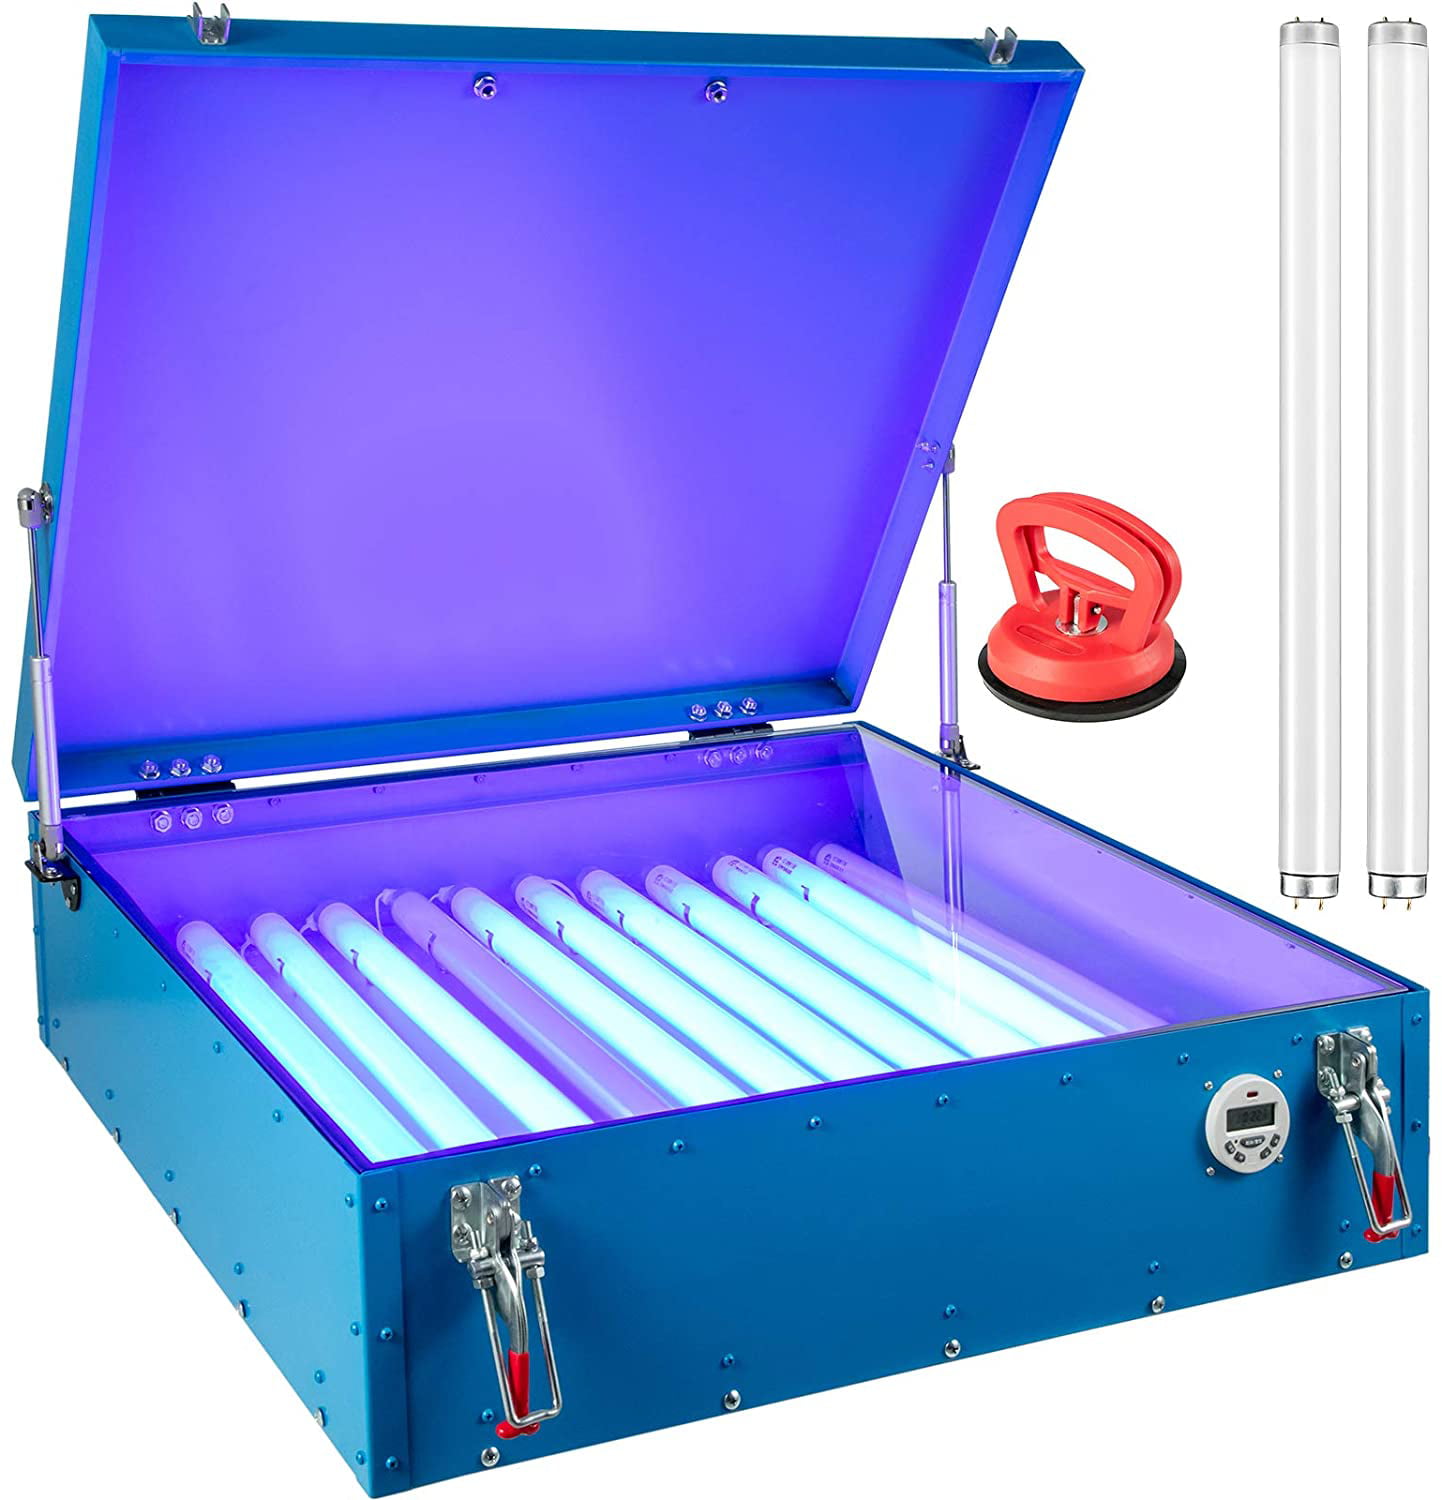 110v 6 UV Lamps Electric Screen Printing & Hot Stamping Exposure Unit for sale online 